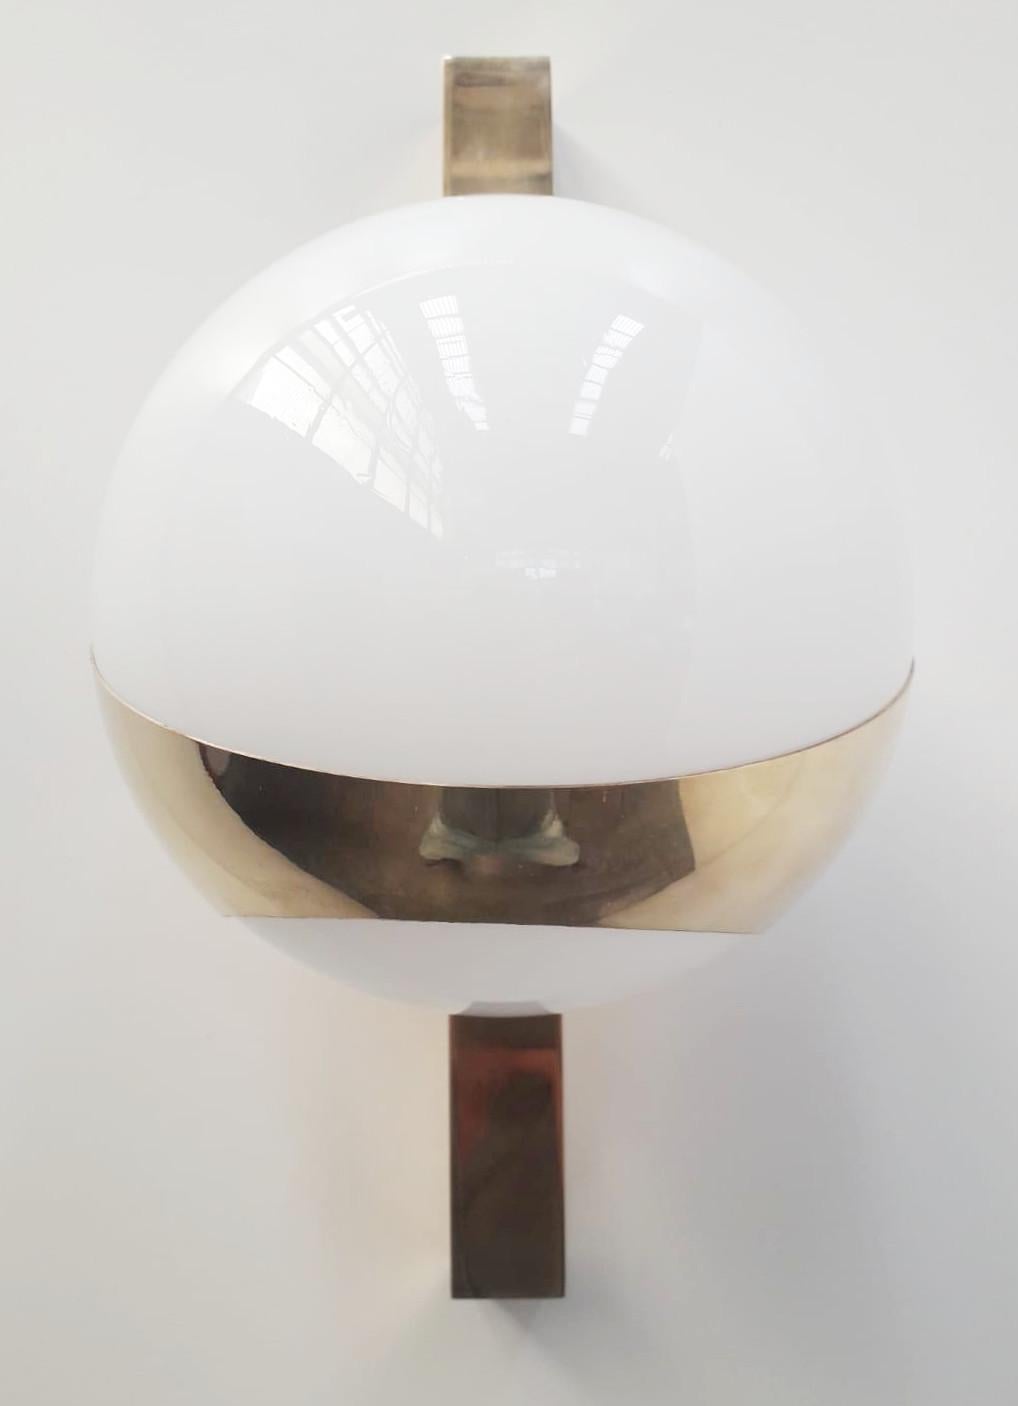 Italian wall lights with glossy white Murano glass globes and brass brackets / Designed by Stilnovo, circa 1960’s / Made in Italy
1 light / E12 or E14 type / max 40W 
Height: 13 inches / Width: 6.5 inches / Depth: 8 inches 
10 in stock in Palm